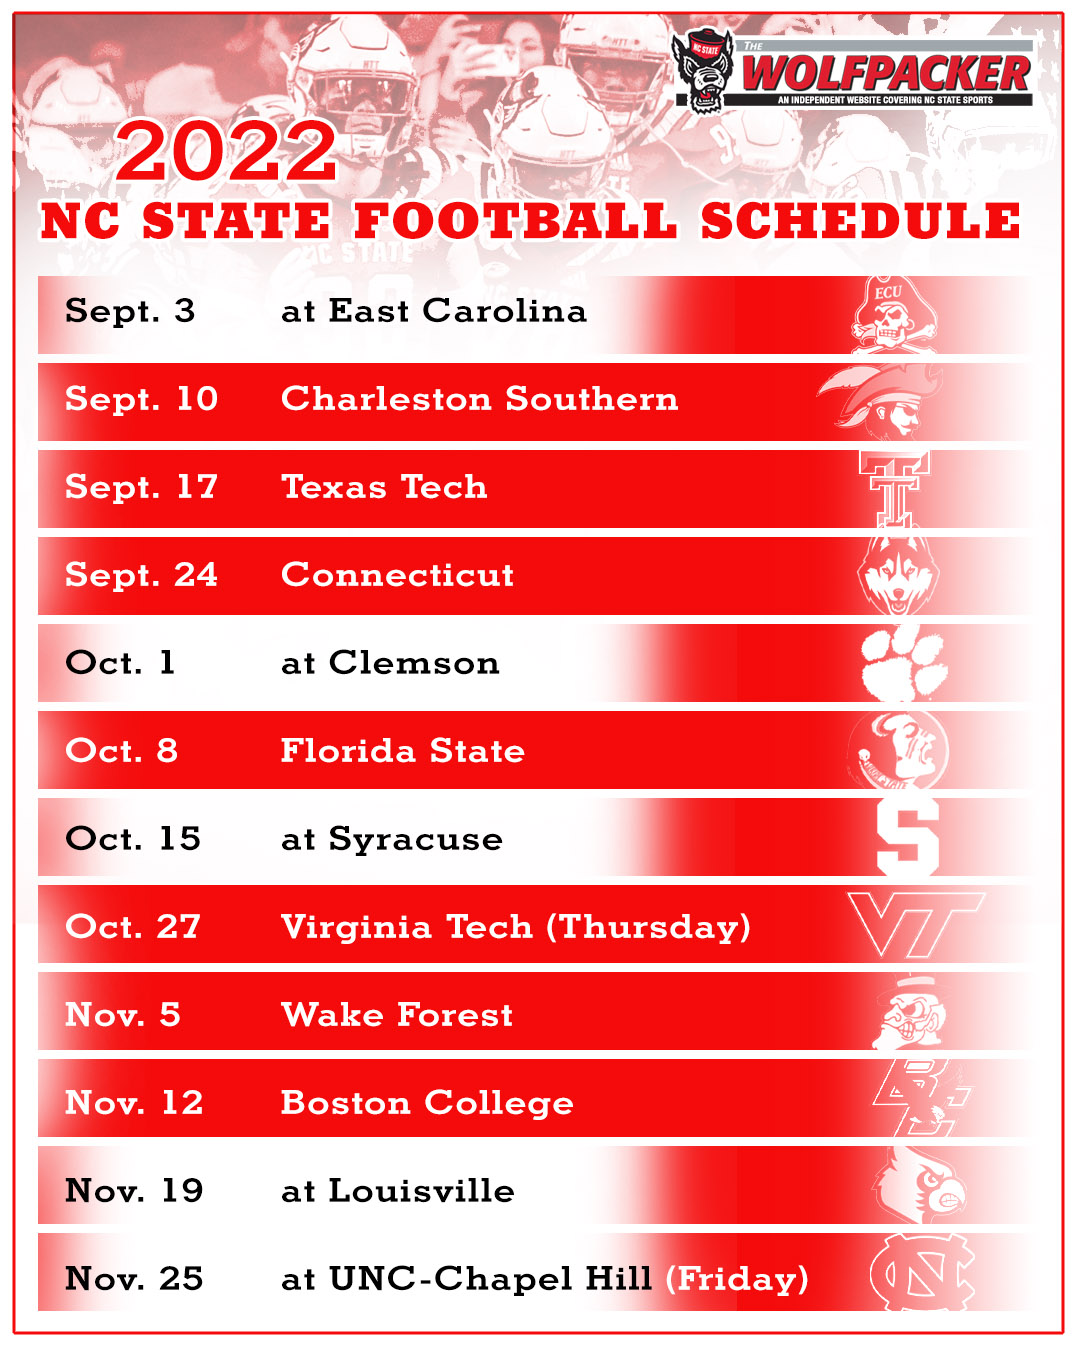 NC State football 2022 schedule: Ten observations - On3